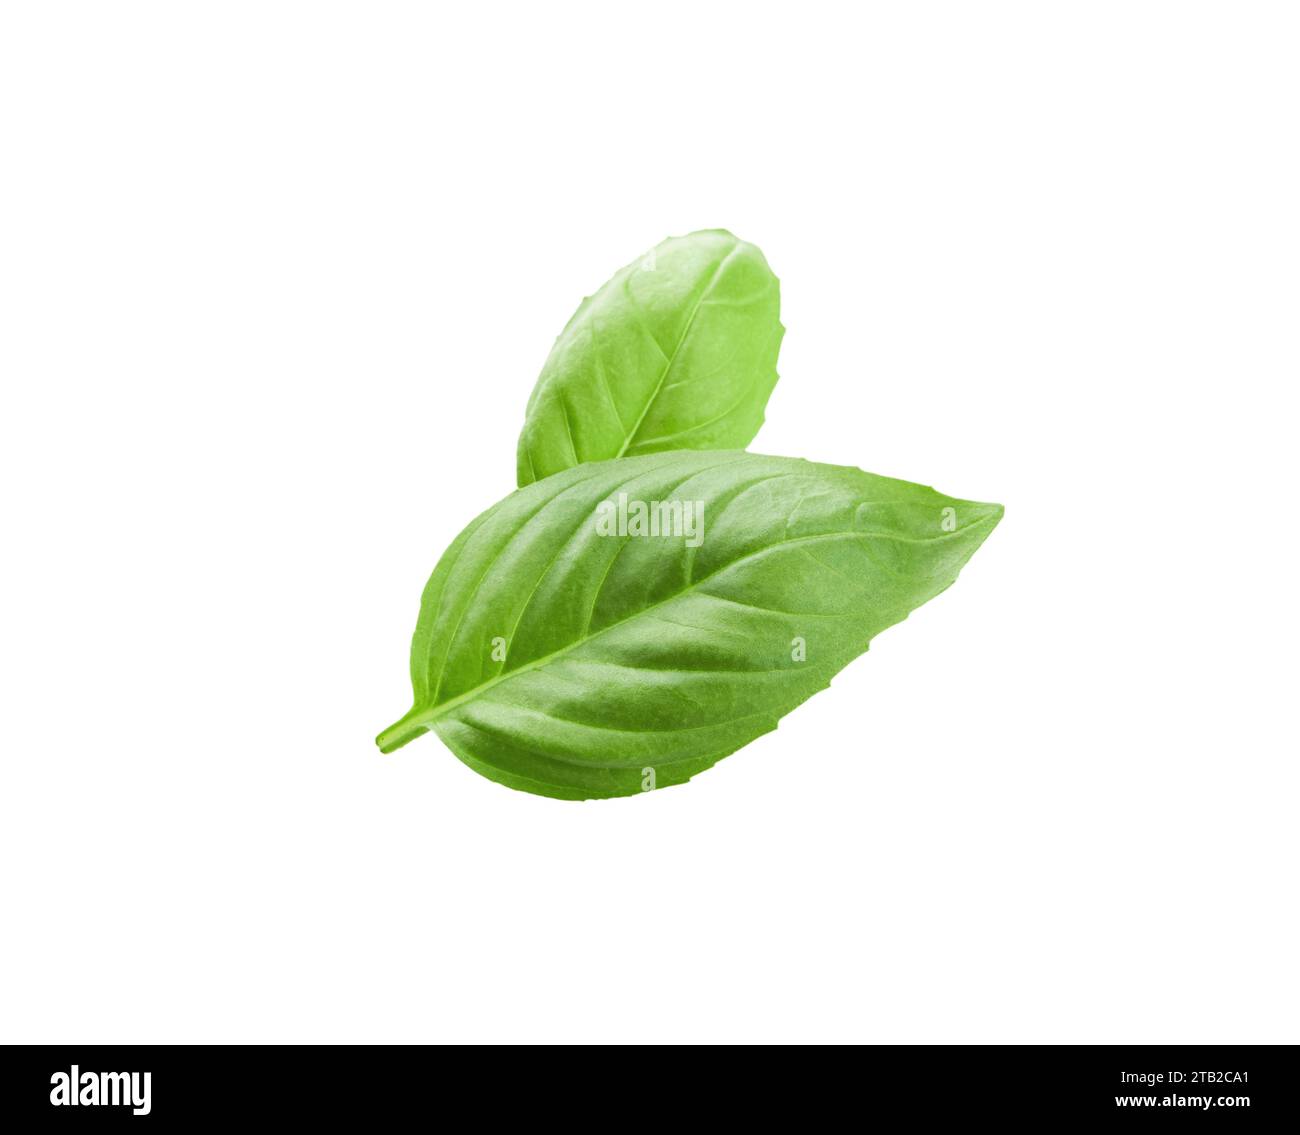 Basil isolated. Basil green fresh leaf flat lay isolated on white background. Few pieces or several slices. High resolution image. Can be used for sel Stock Photo